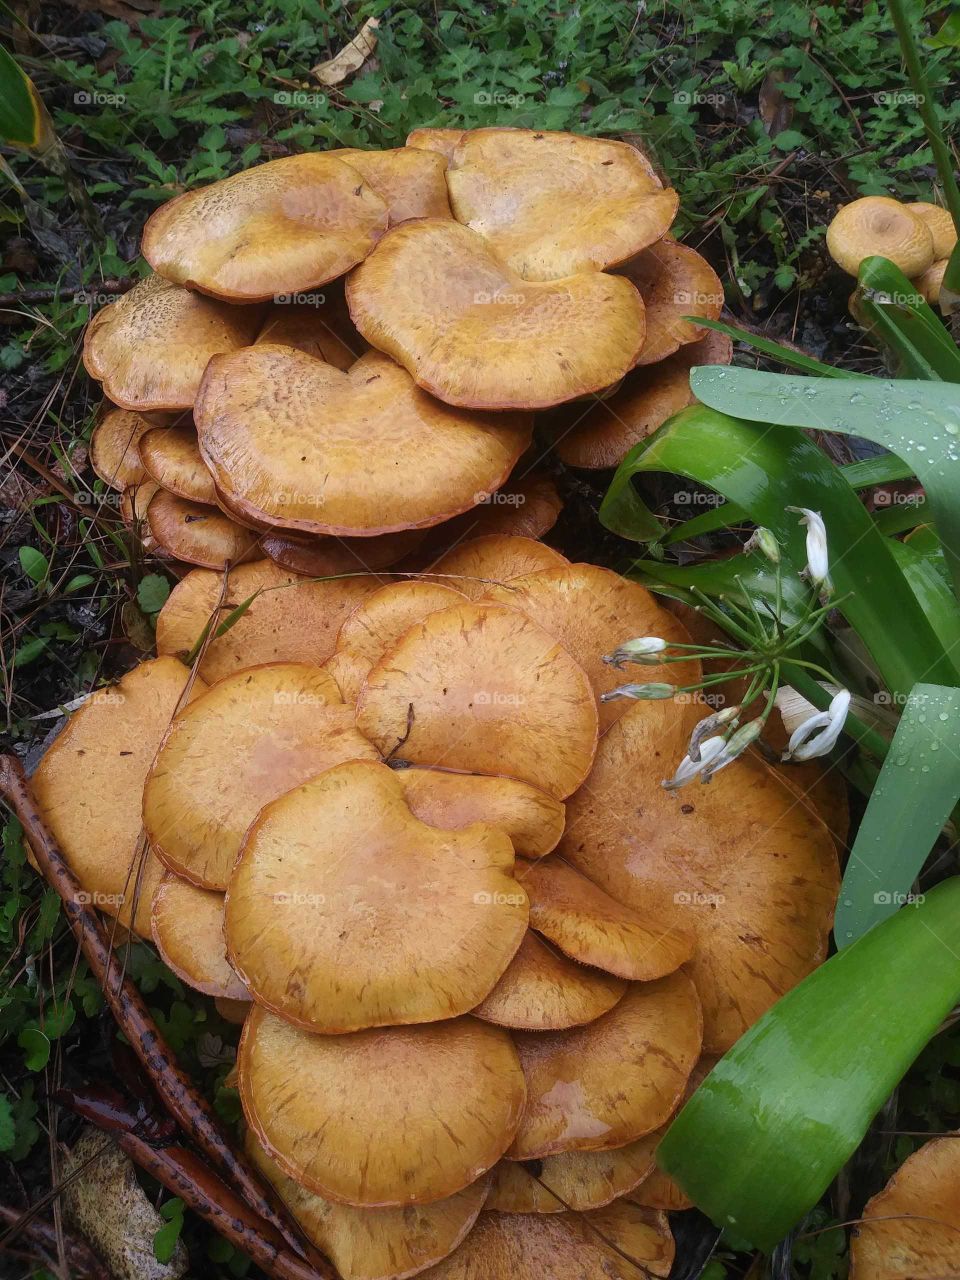 Cluster of Orange Brown Smooth Mushroom Caps Growing Next to Green Foliage and Plants